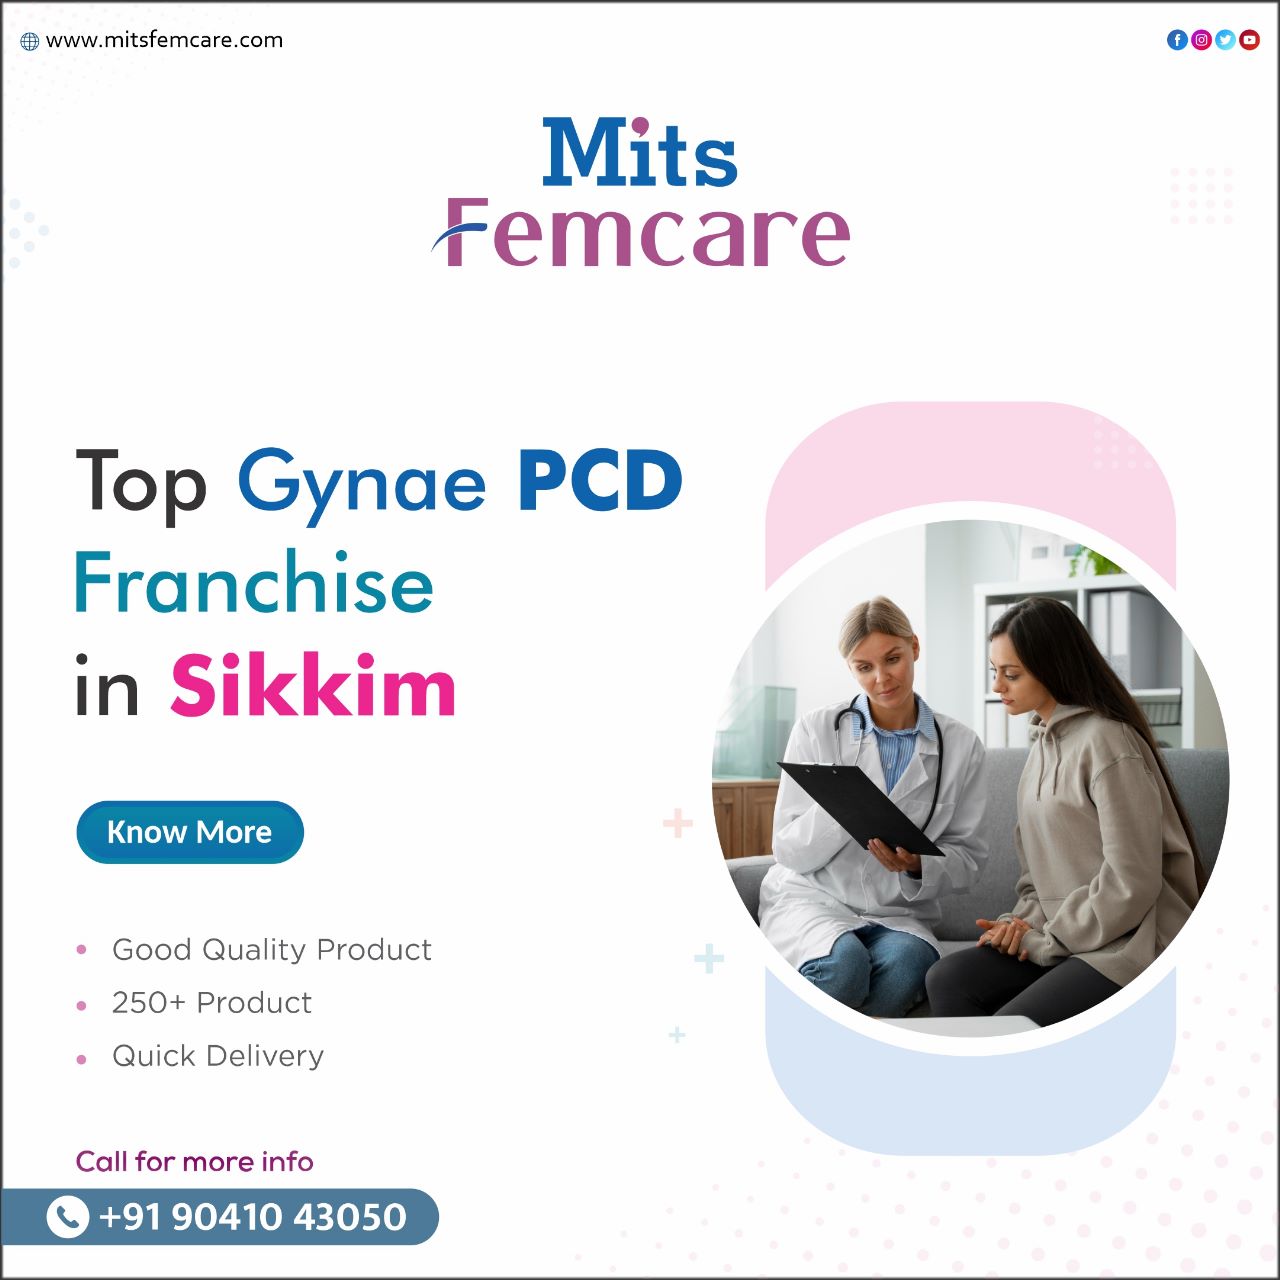 Top Gynae PCD Franchise in Sikkim